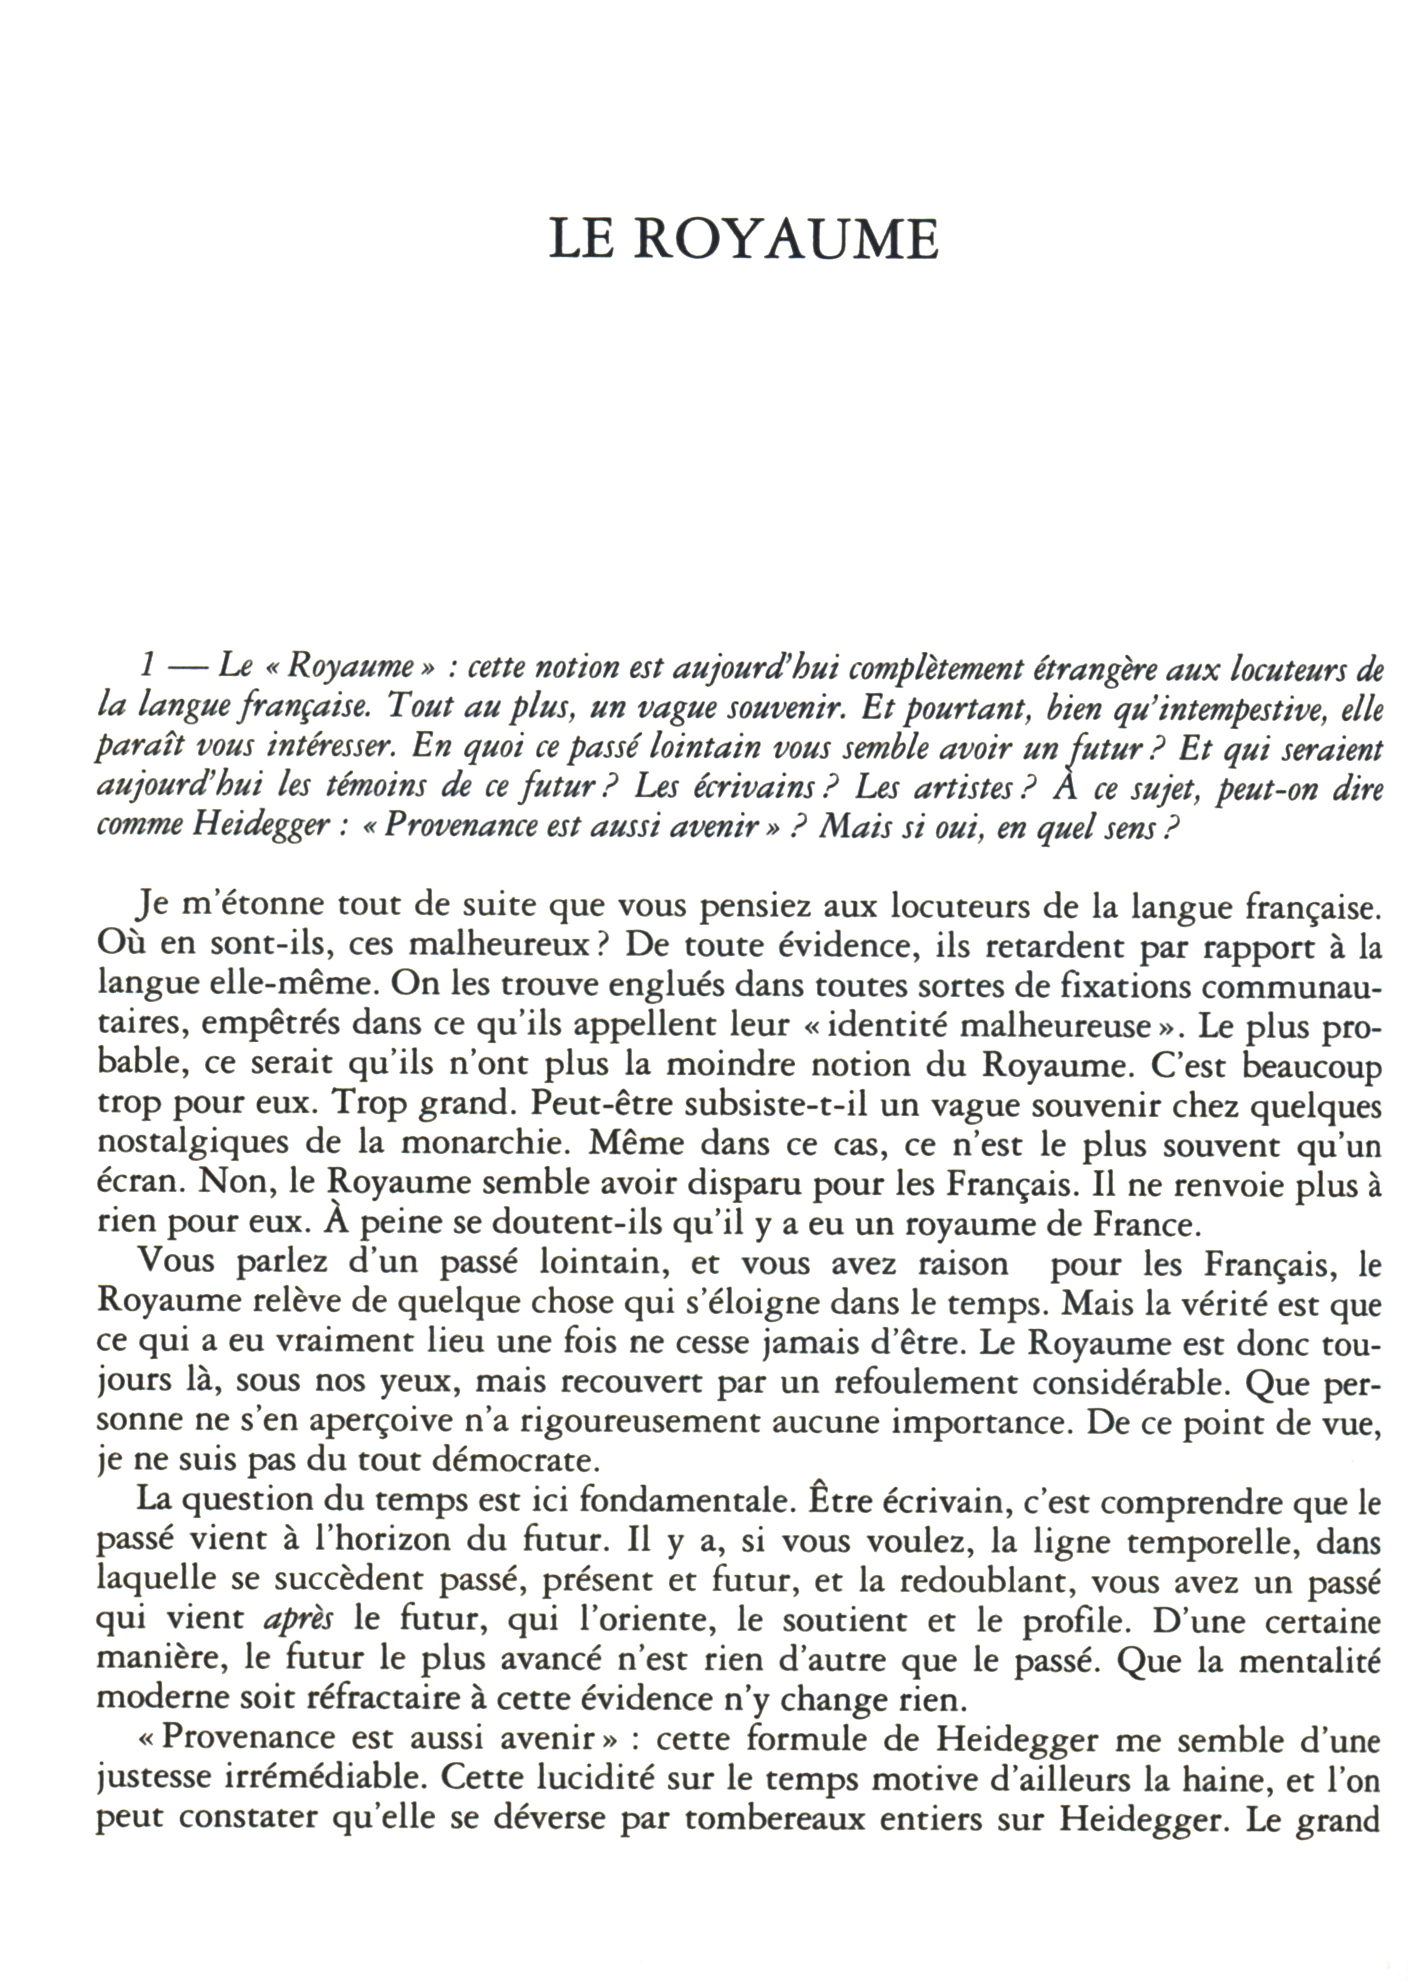 Philippe Sollers, Le Royaume